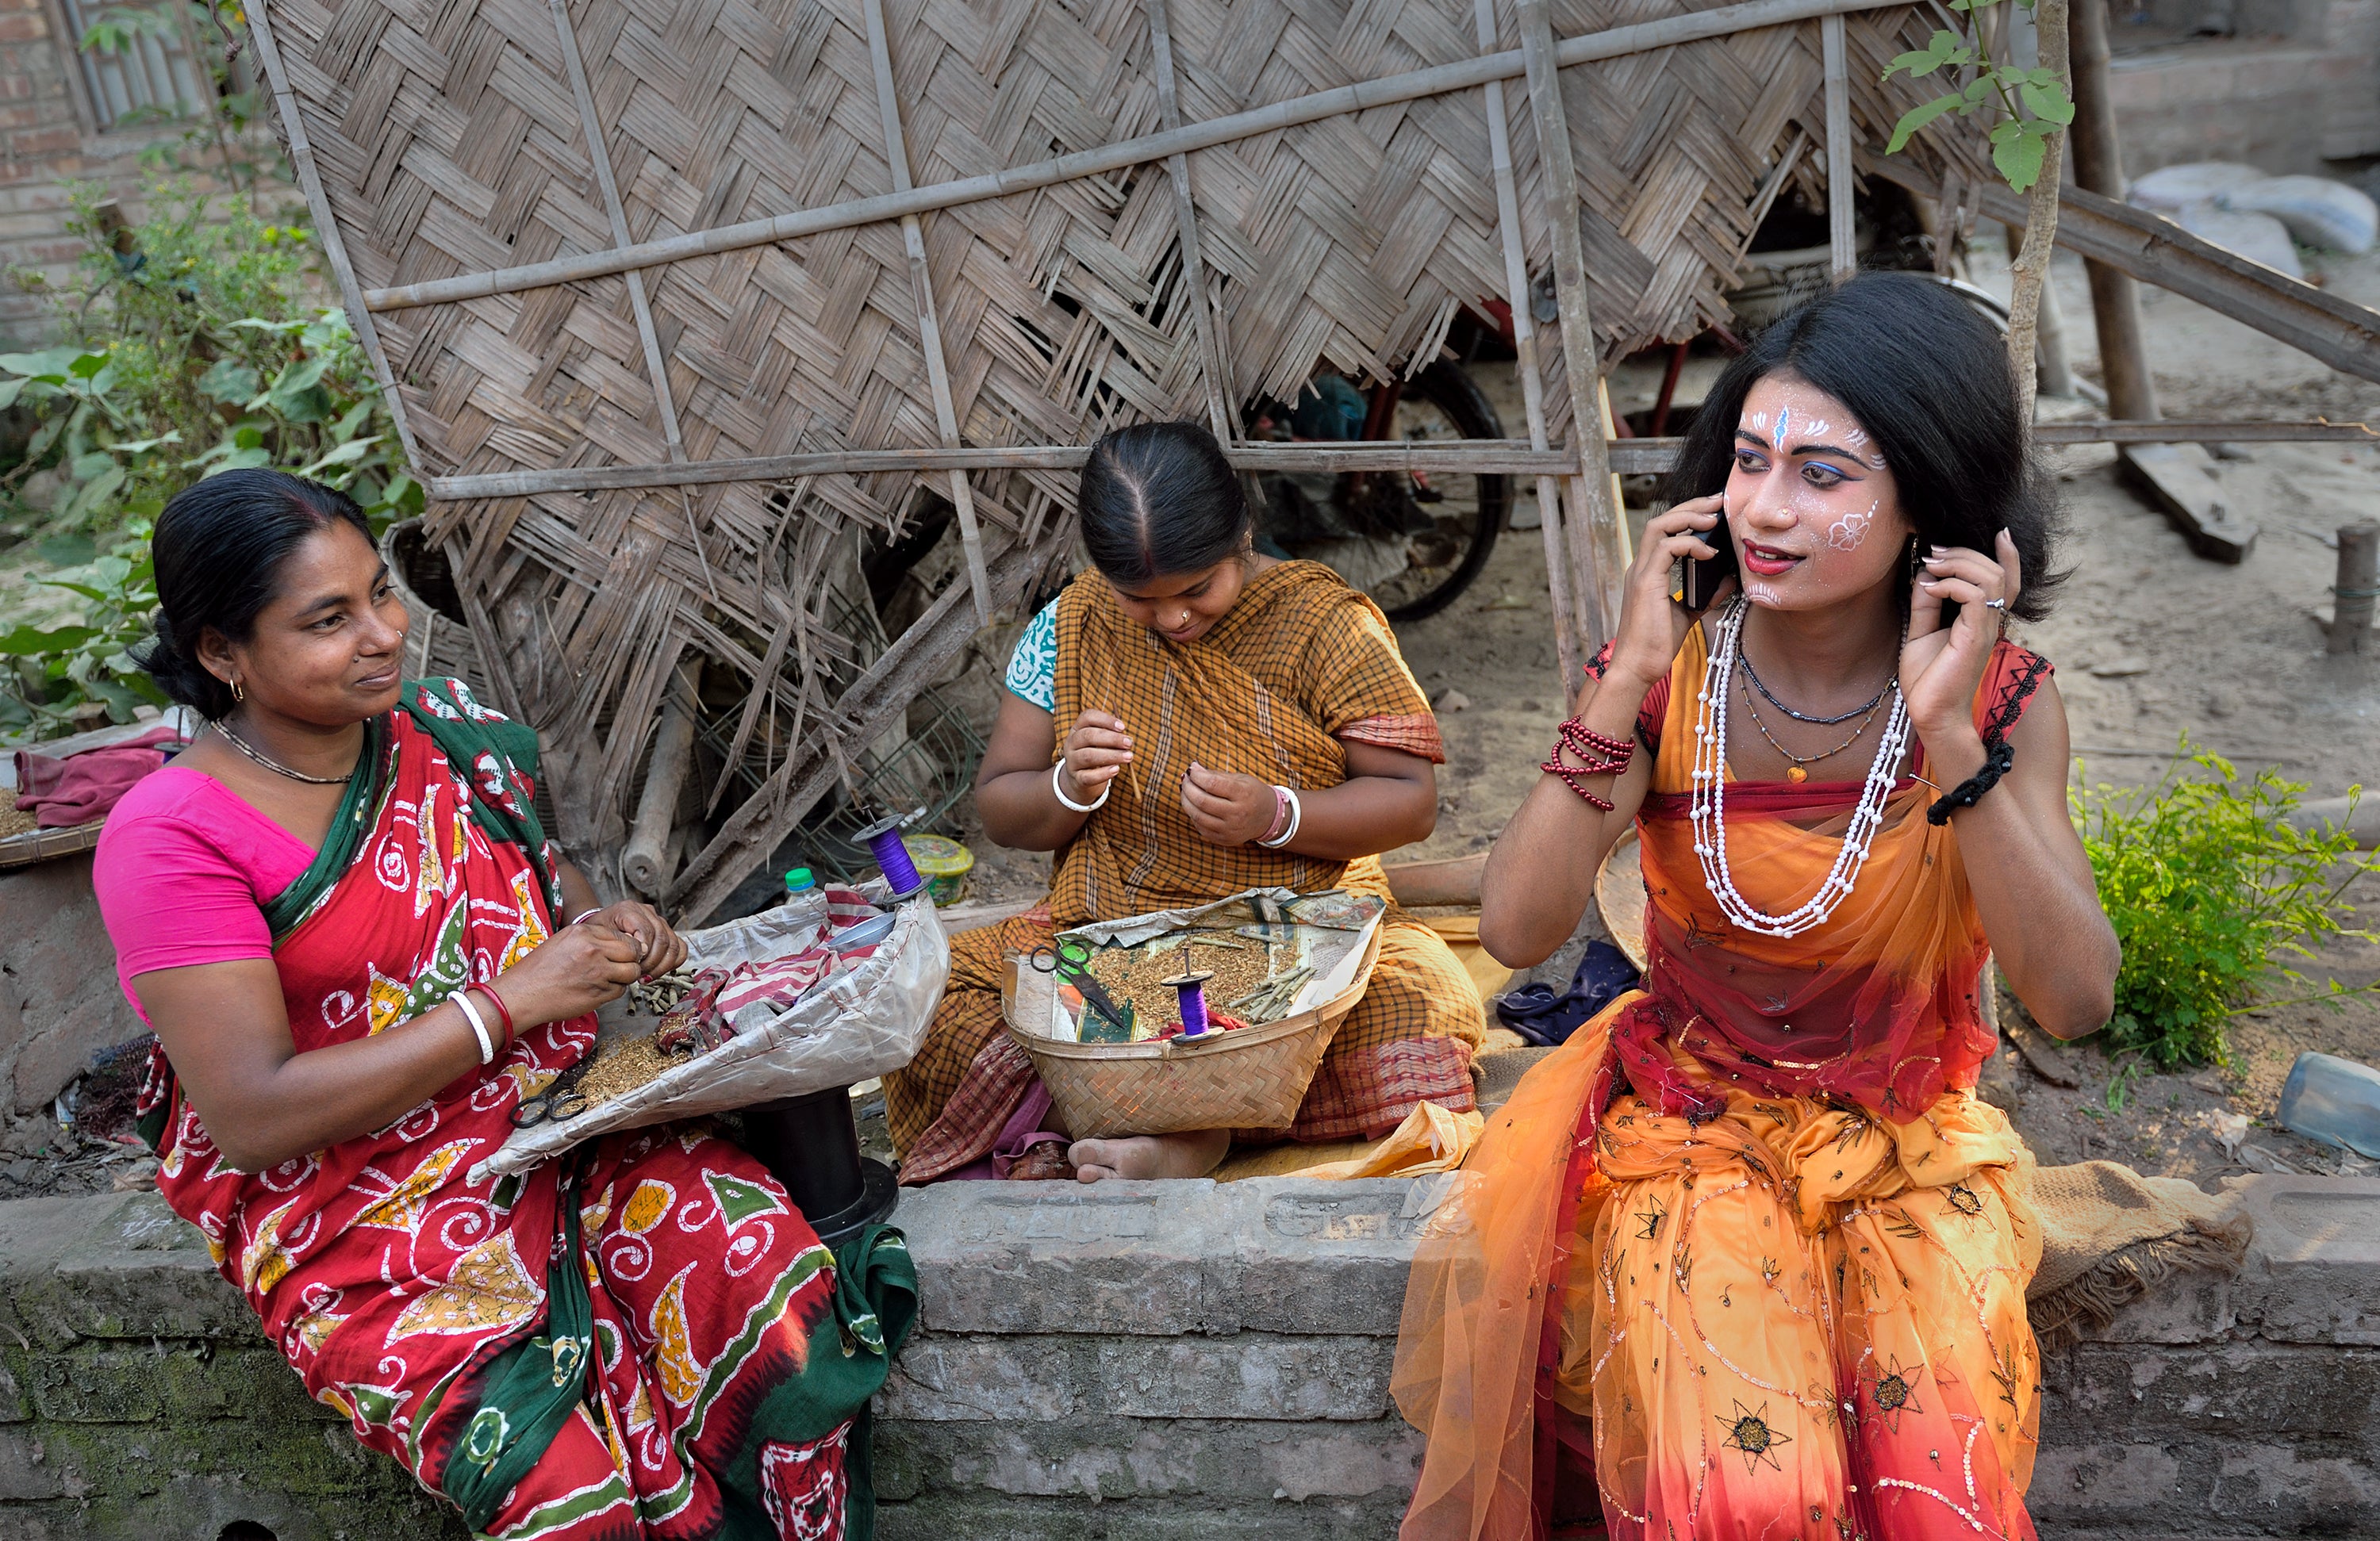 A merchant uses her mobile phone in India